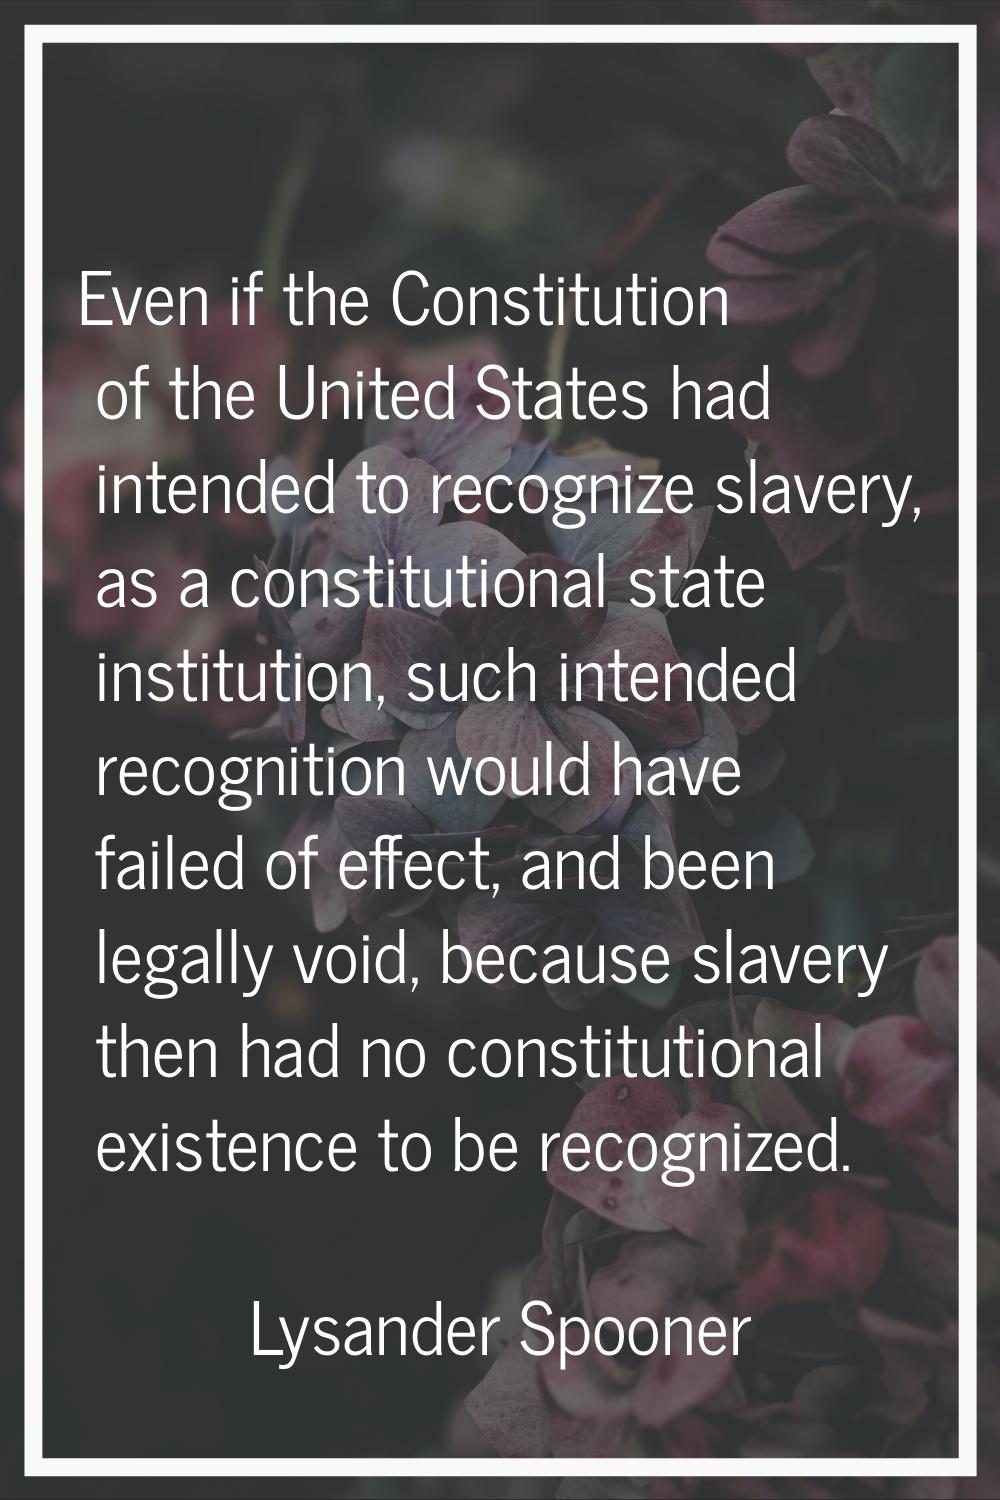 Even if the Constitution of the United States had intended to recognize slavery, as a constitutiona